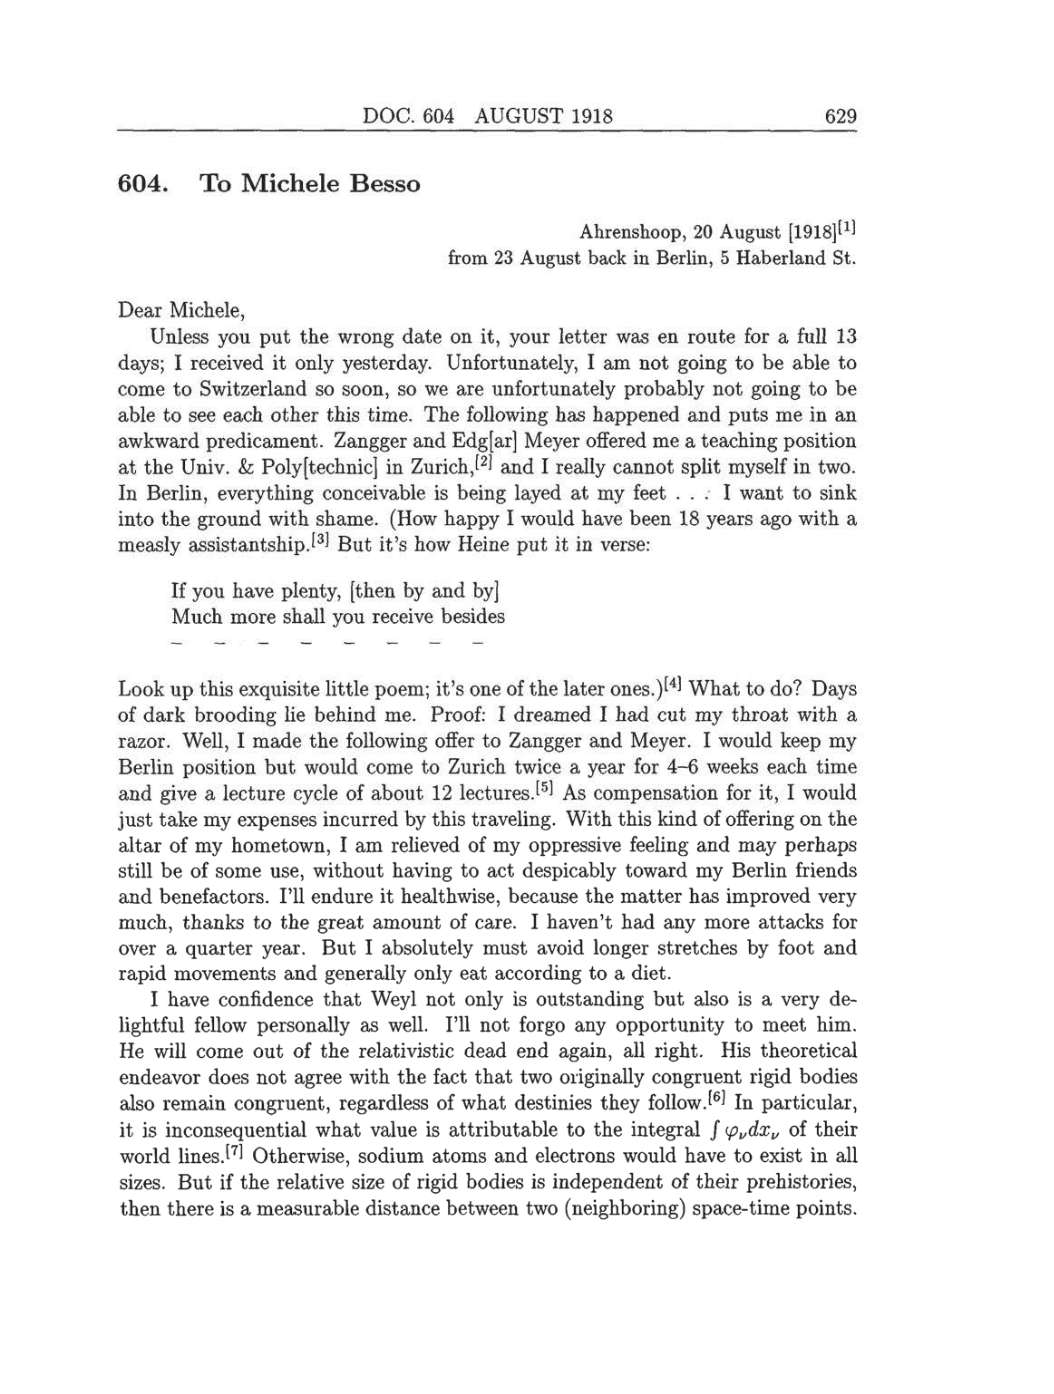 Volume 8: The Berlin Years: Correspondence, 1914-1918 (English translation supplement) page 629